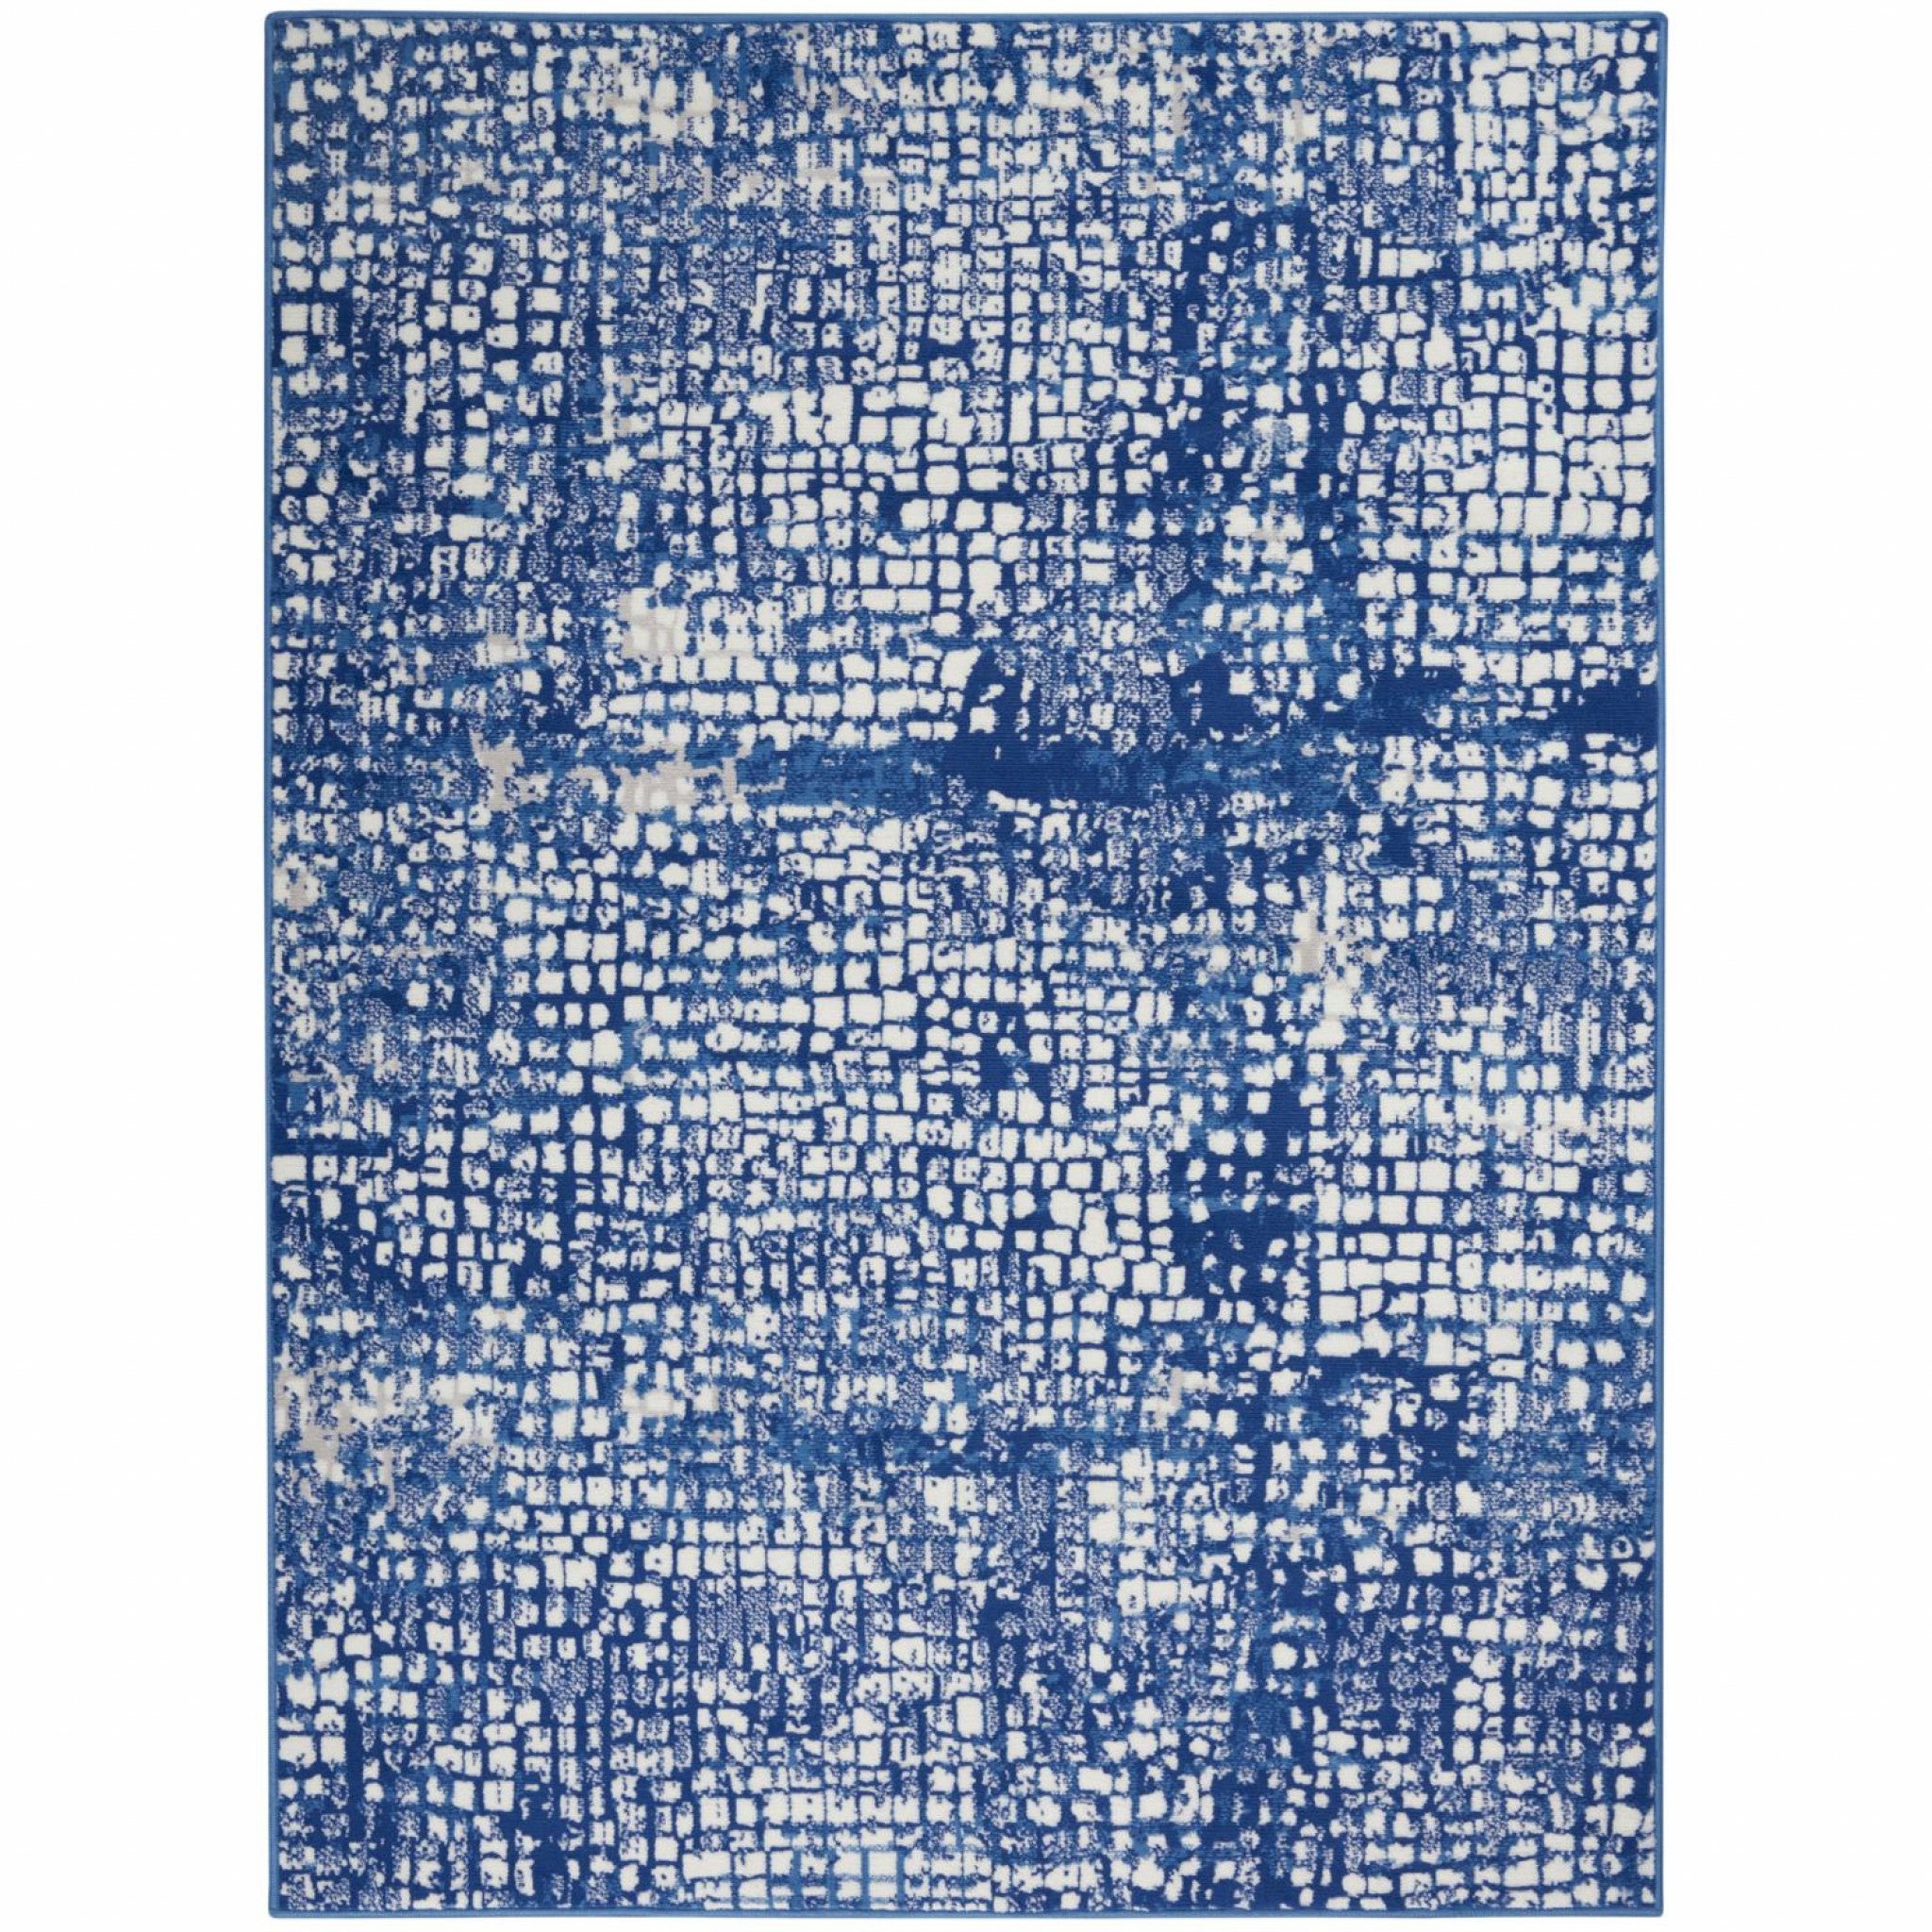 4' X 6' Blue And Ivory Abstract Dhurrie Area Rug